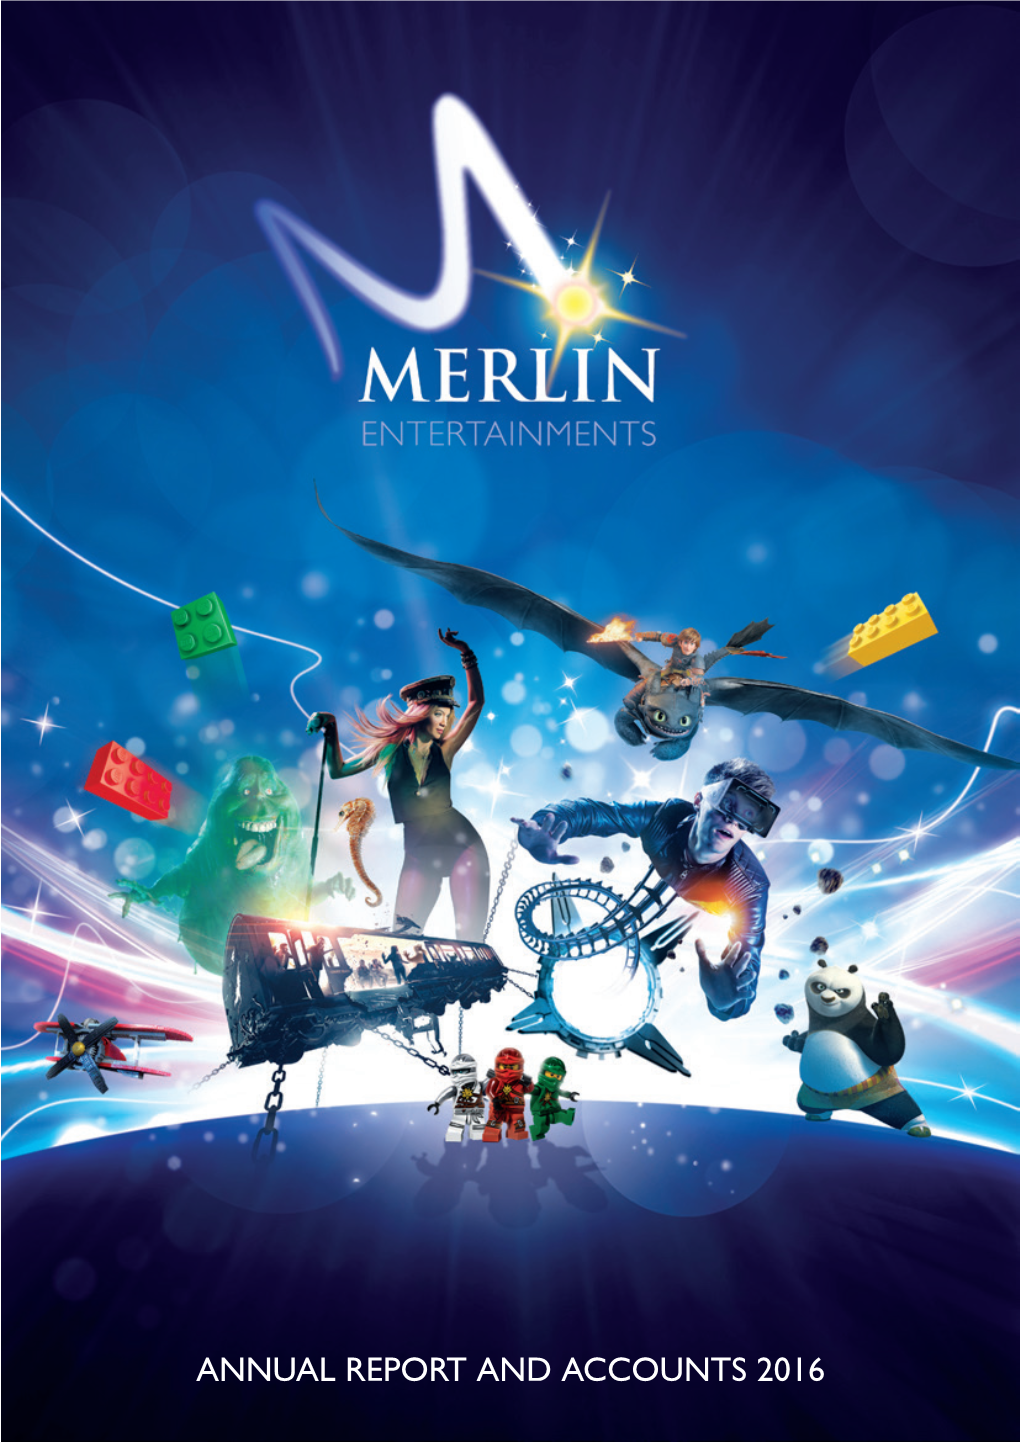 ANNUAL REPORT and ACCOUNTS 2016 Worldreginfo - 885765Fb-Eb04-49Cd-8514-2Bf07f7b8e48 Merlin Entertainments Plc Annual Report and Accounts 2016 HIGHLIGHTS